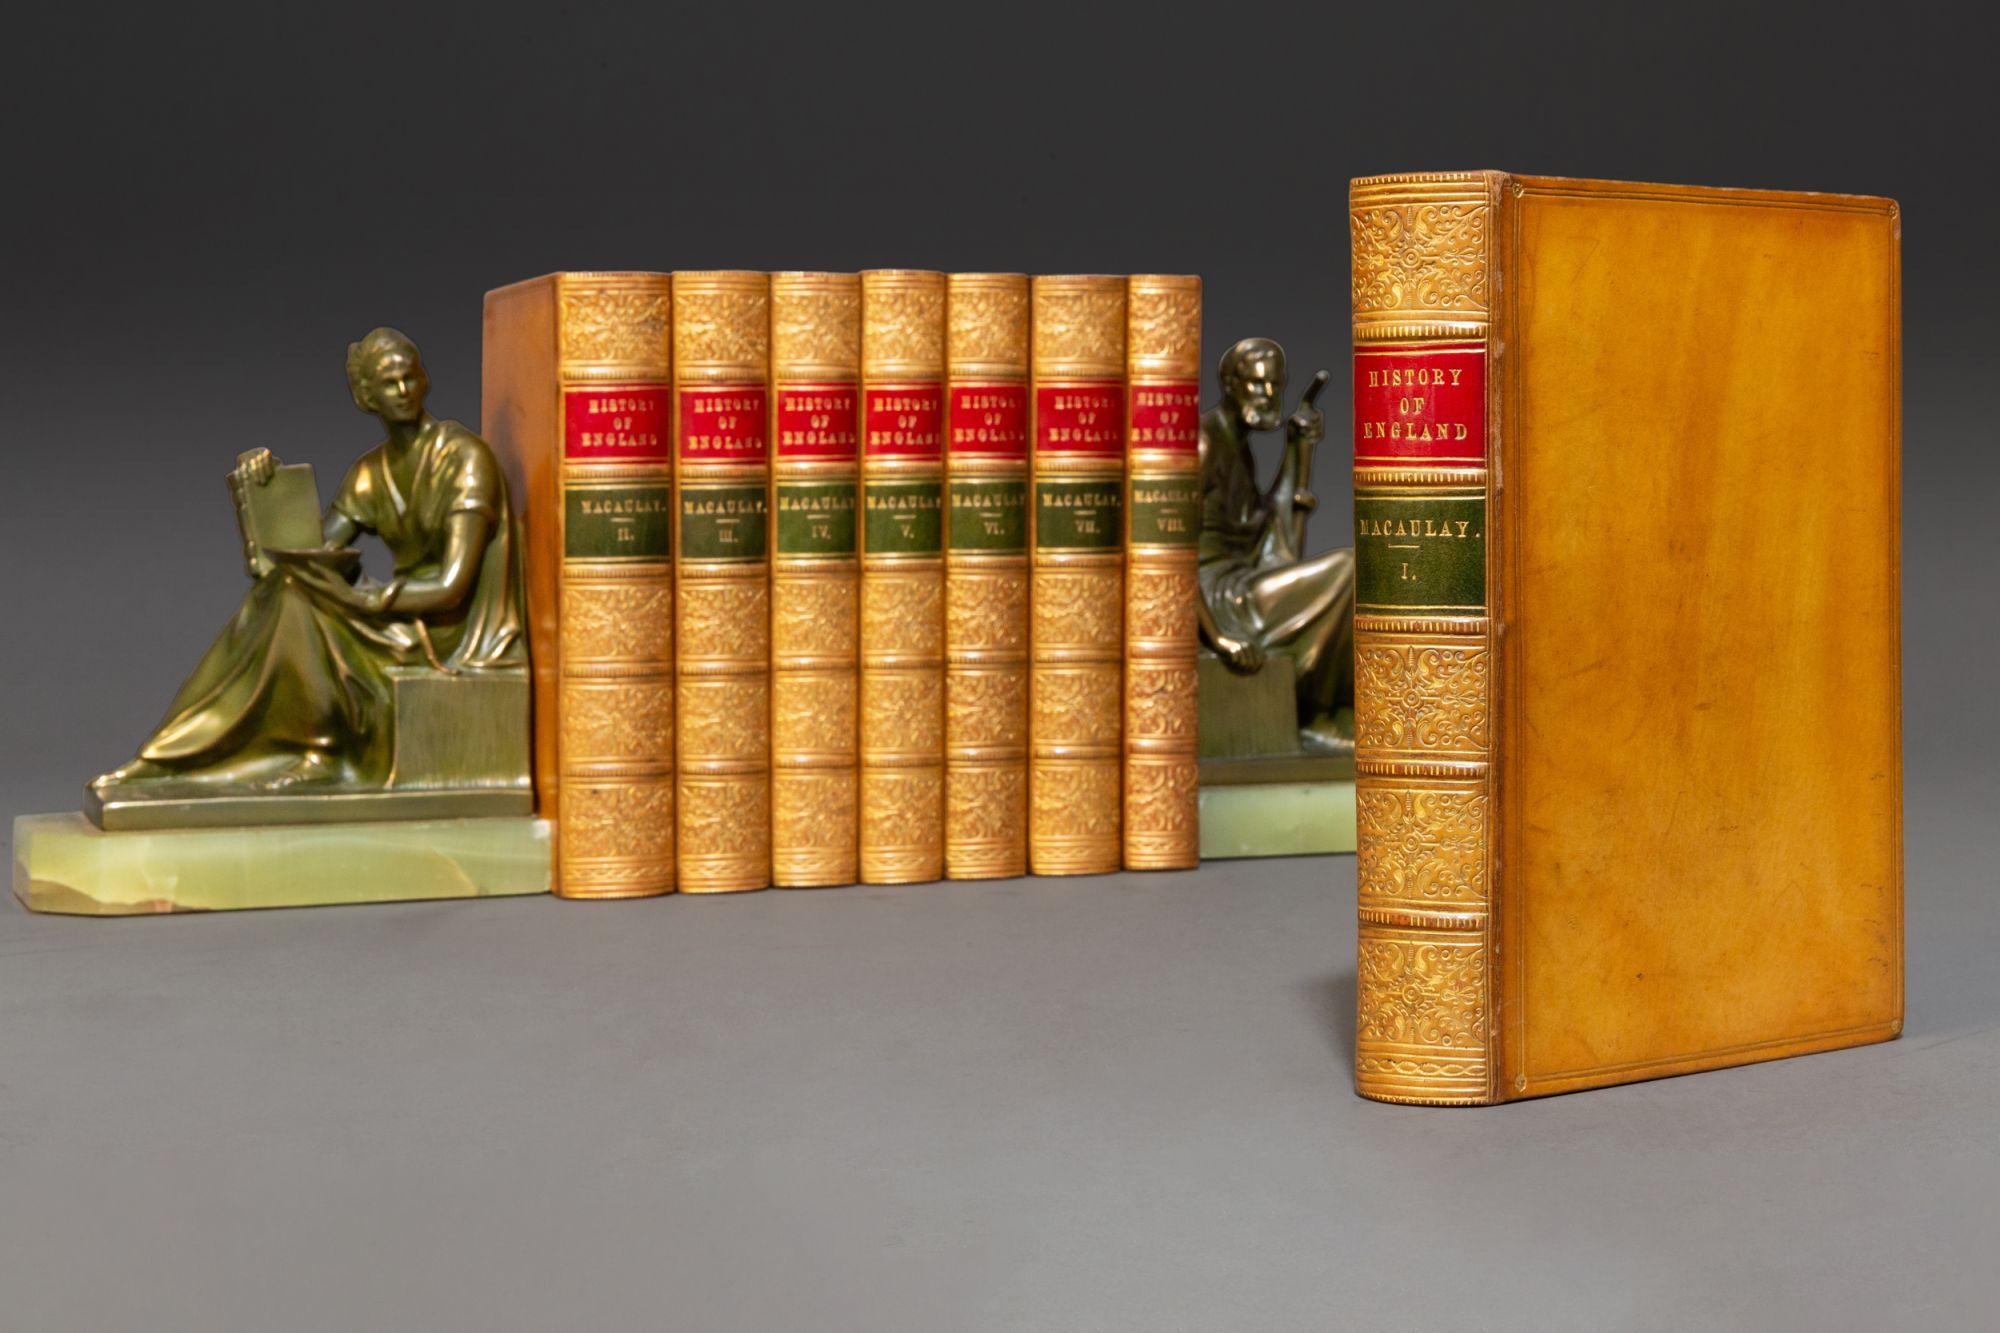 8 Volumes. Lord Macaulay. The History of England. From the Accession of James the Second. With handwritten notes in endpapers. Bound in full tan calf. Ornate gilt on covers & spines. Red & green labels, raised bands, marbled endpapers, marbled